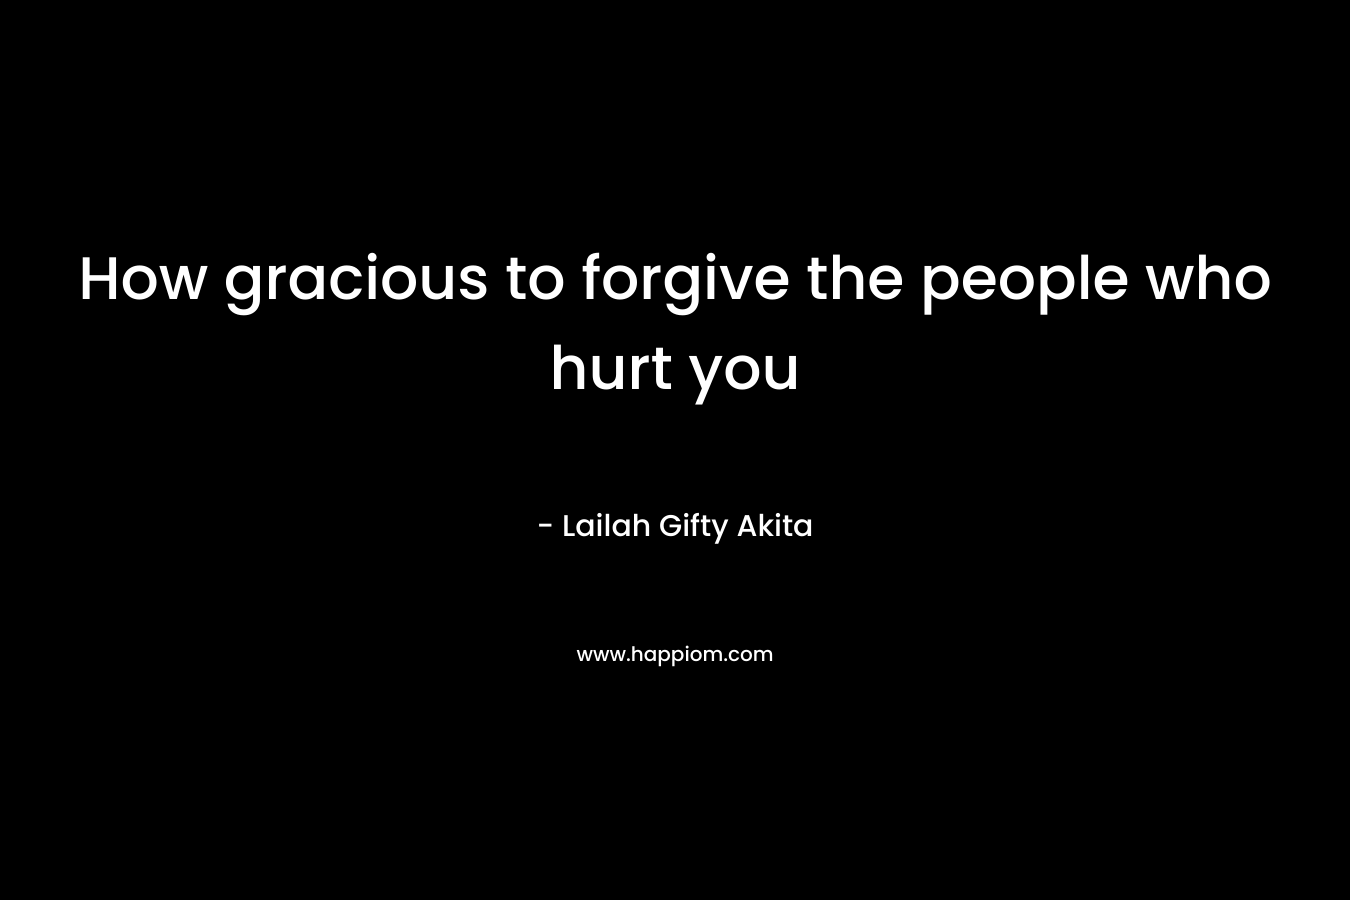 How gracious to forgive the people who hurt you